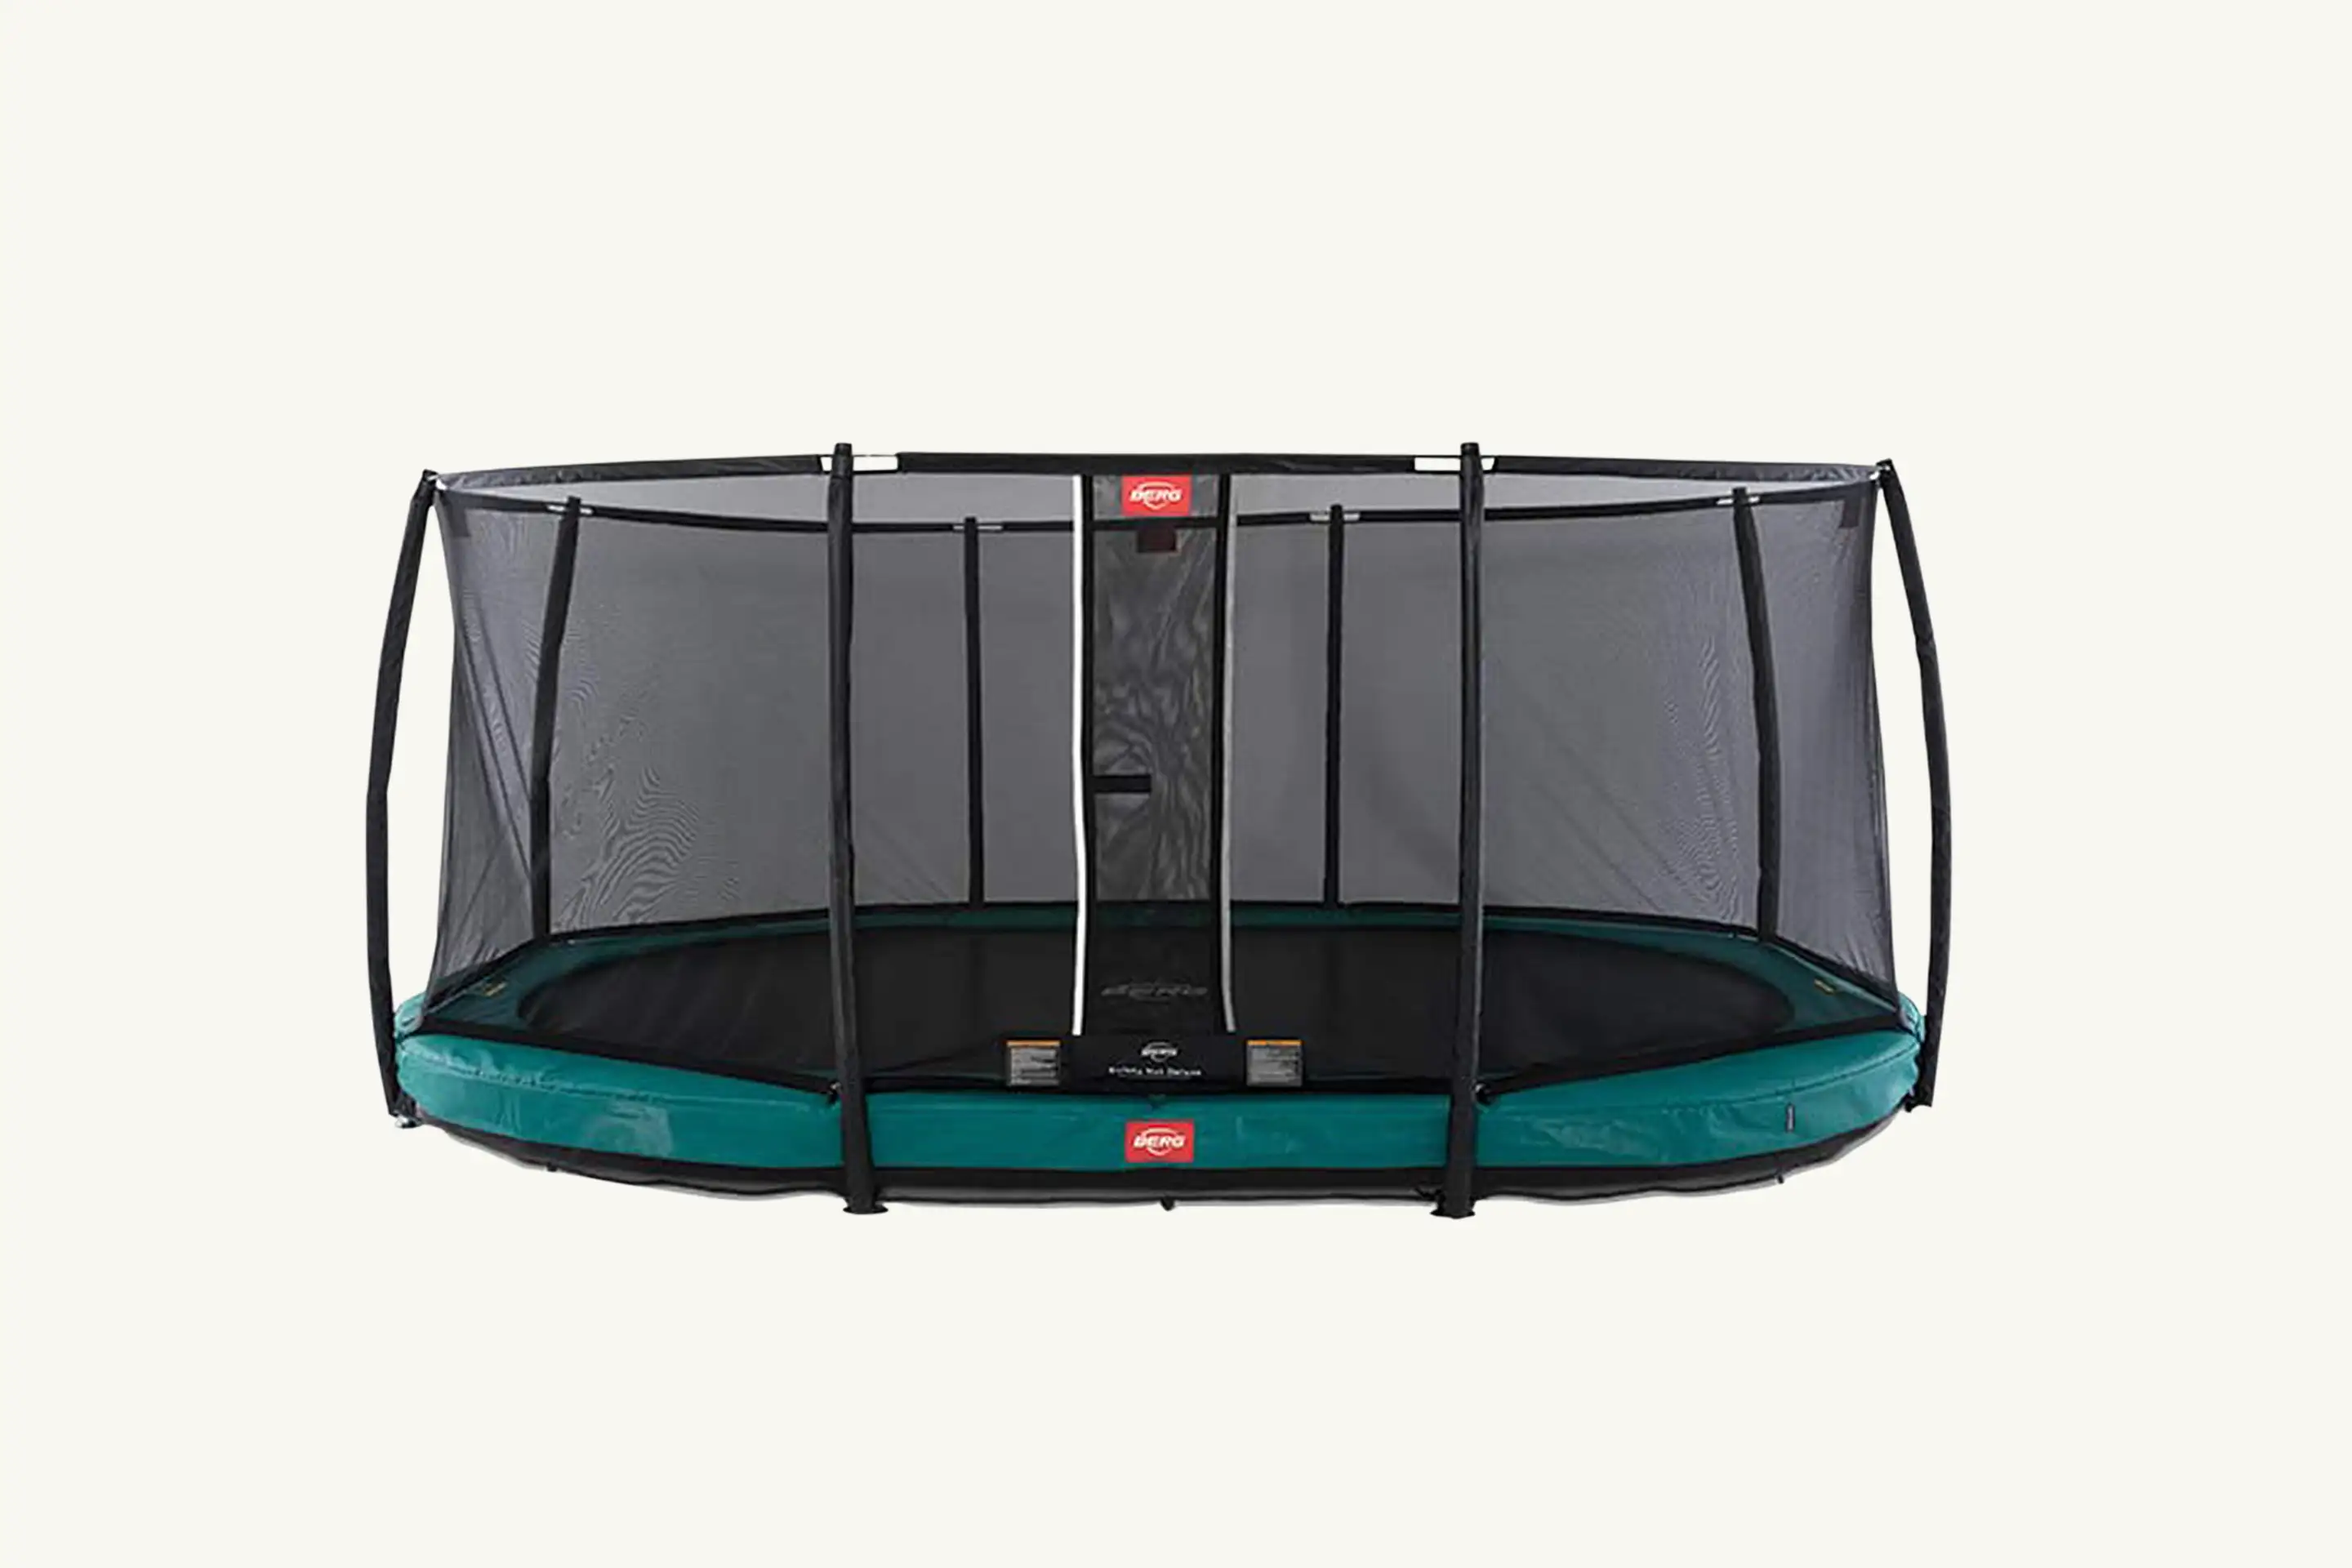 BERG Trampoline Inground Champion Oval 17ft with Safety Enclosure Net